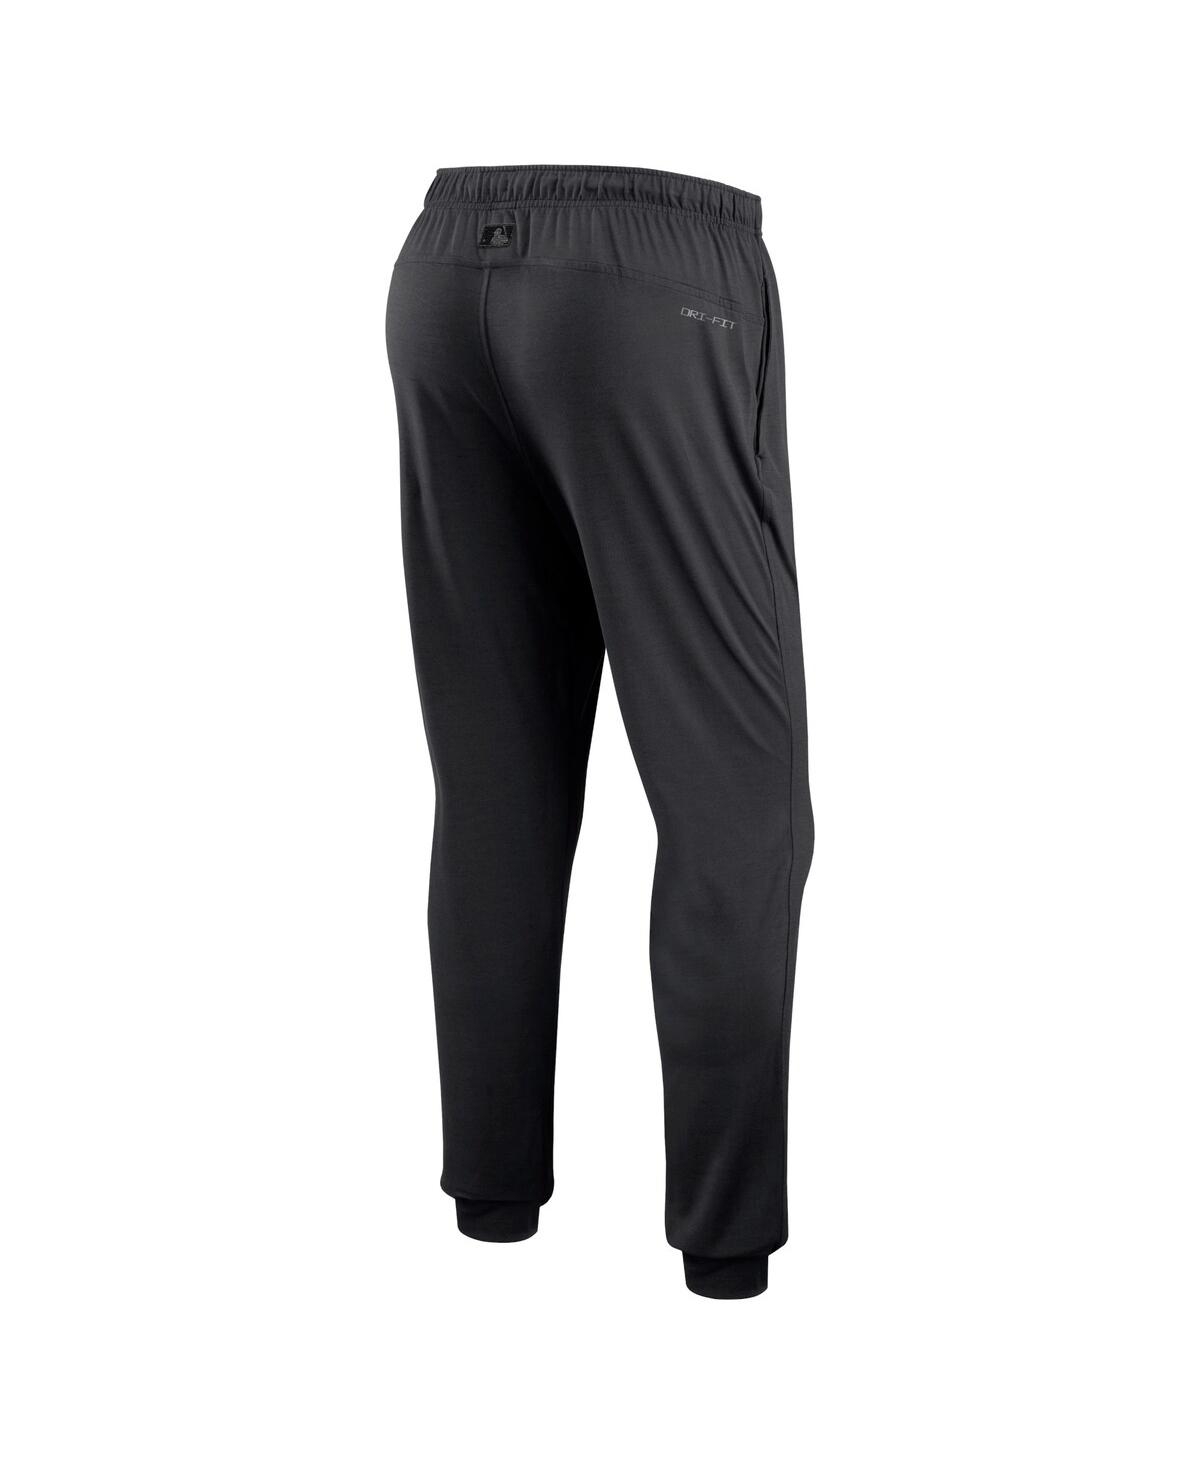 Shop Nike Men's  Black New York Yankees Authentic Collection Travel Performance Pants